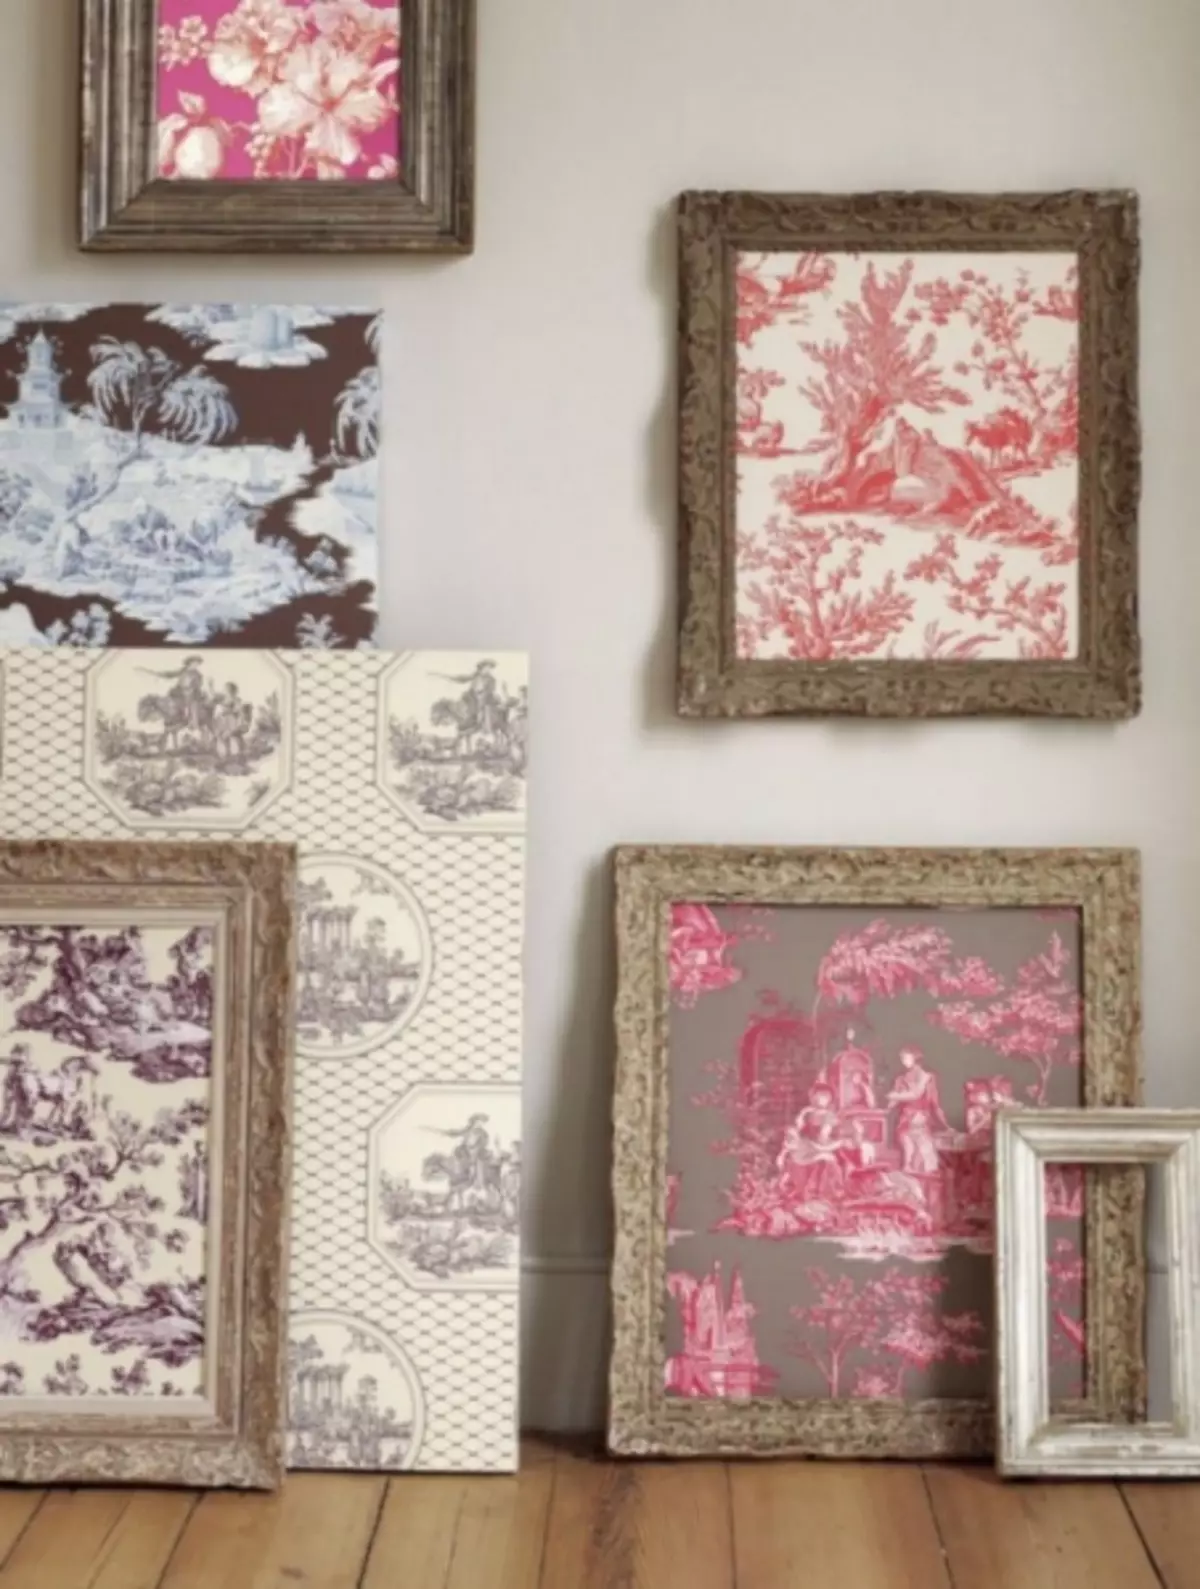 Decor from wallpaper remnants - how to do it? 100 photo examples!